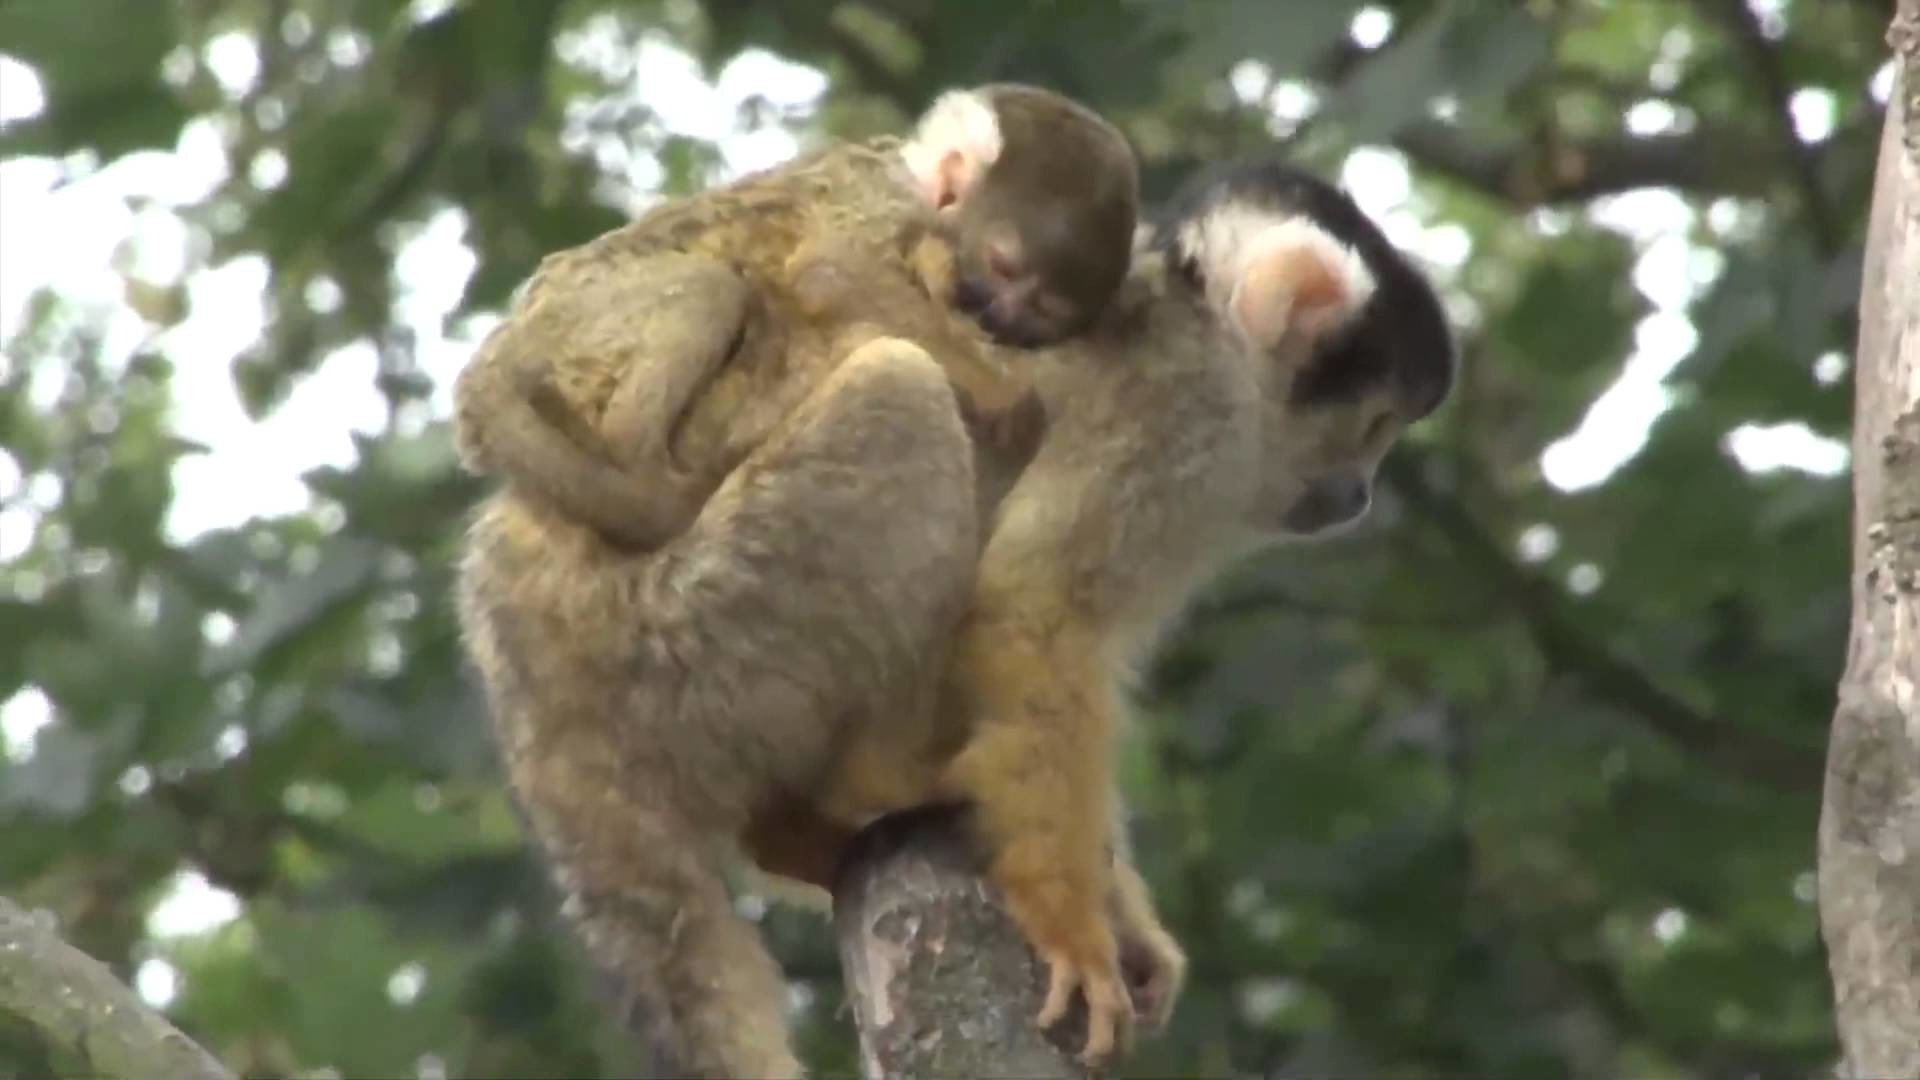 1920x1080 Adorable Baby Monkey Clings to Mom at London Zoo